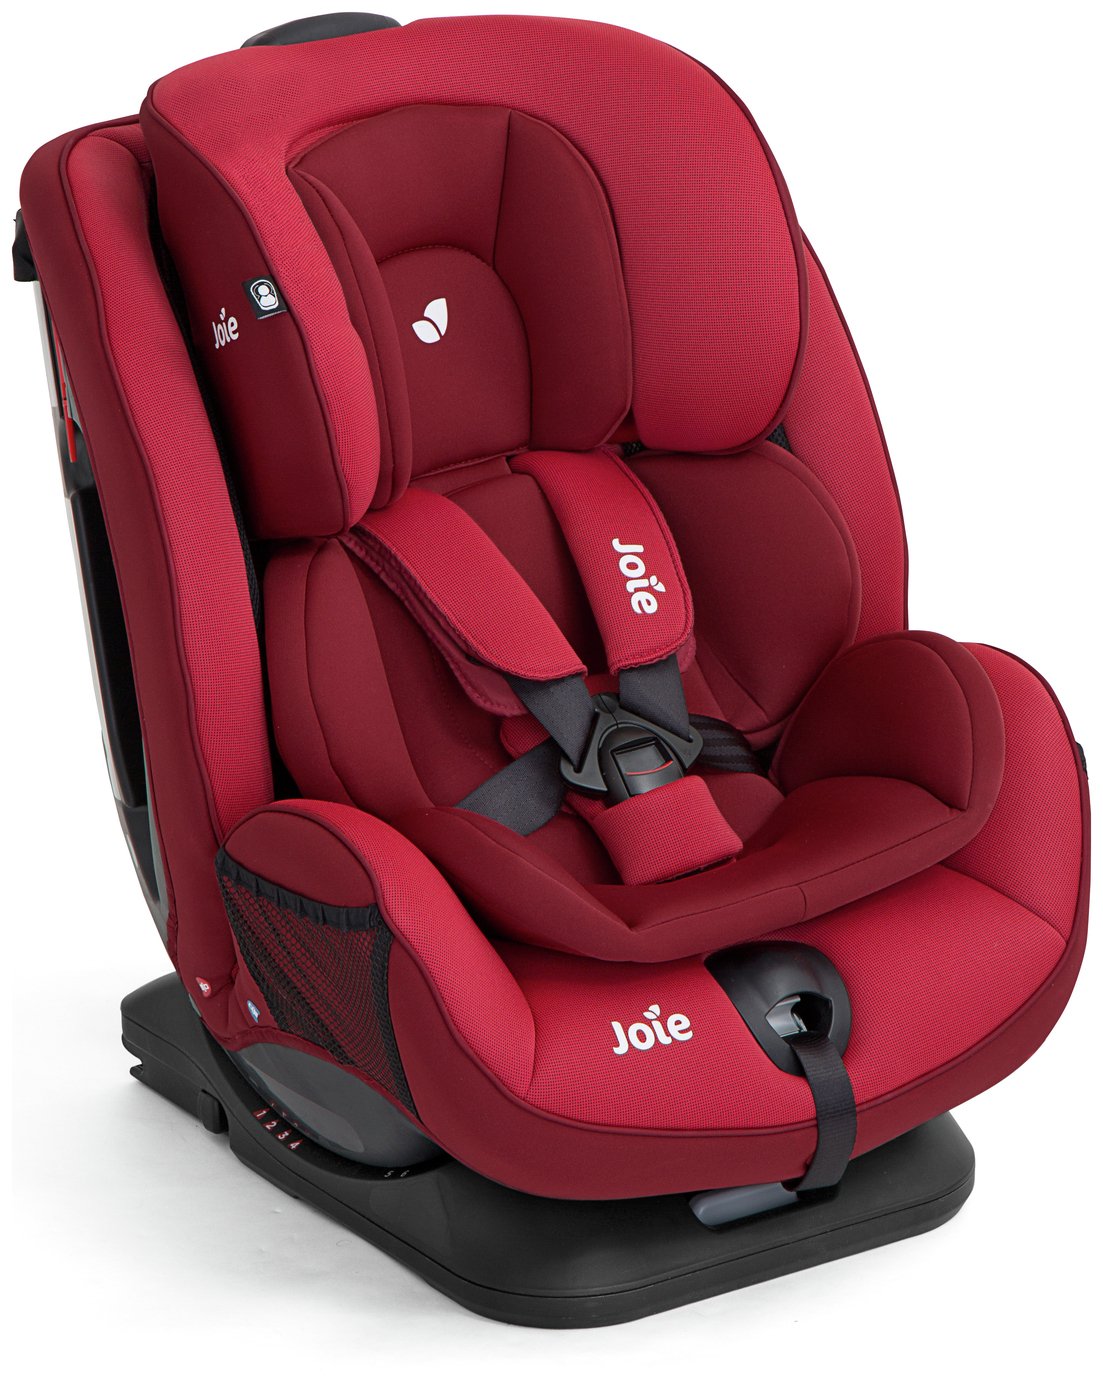 Joie Stages FX 0+/1/2 Isofix Car Seat review